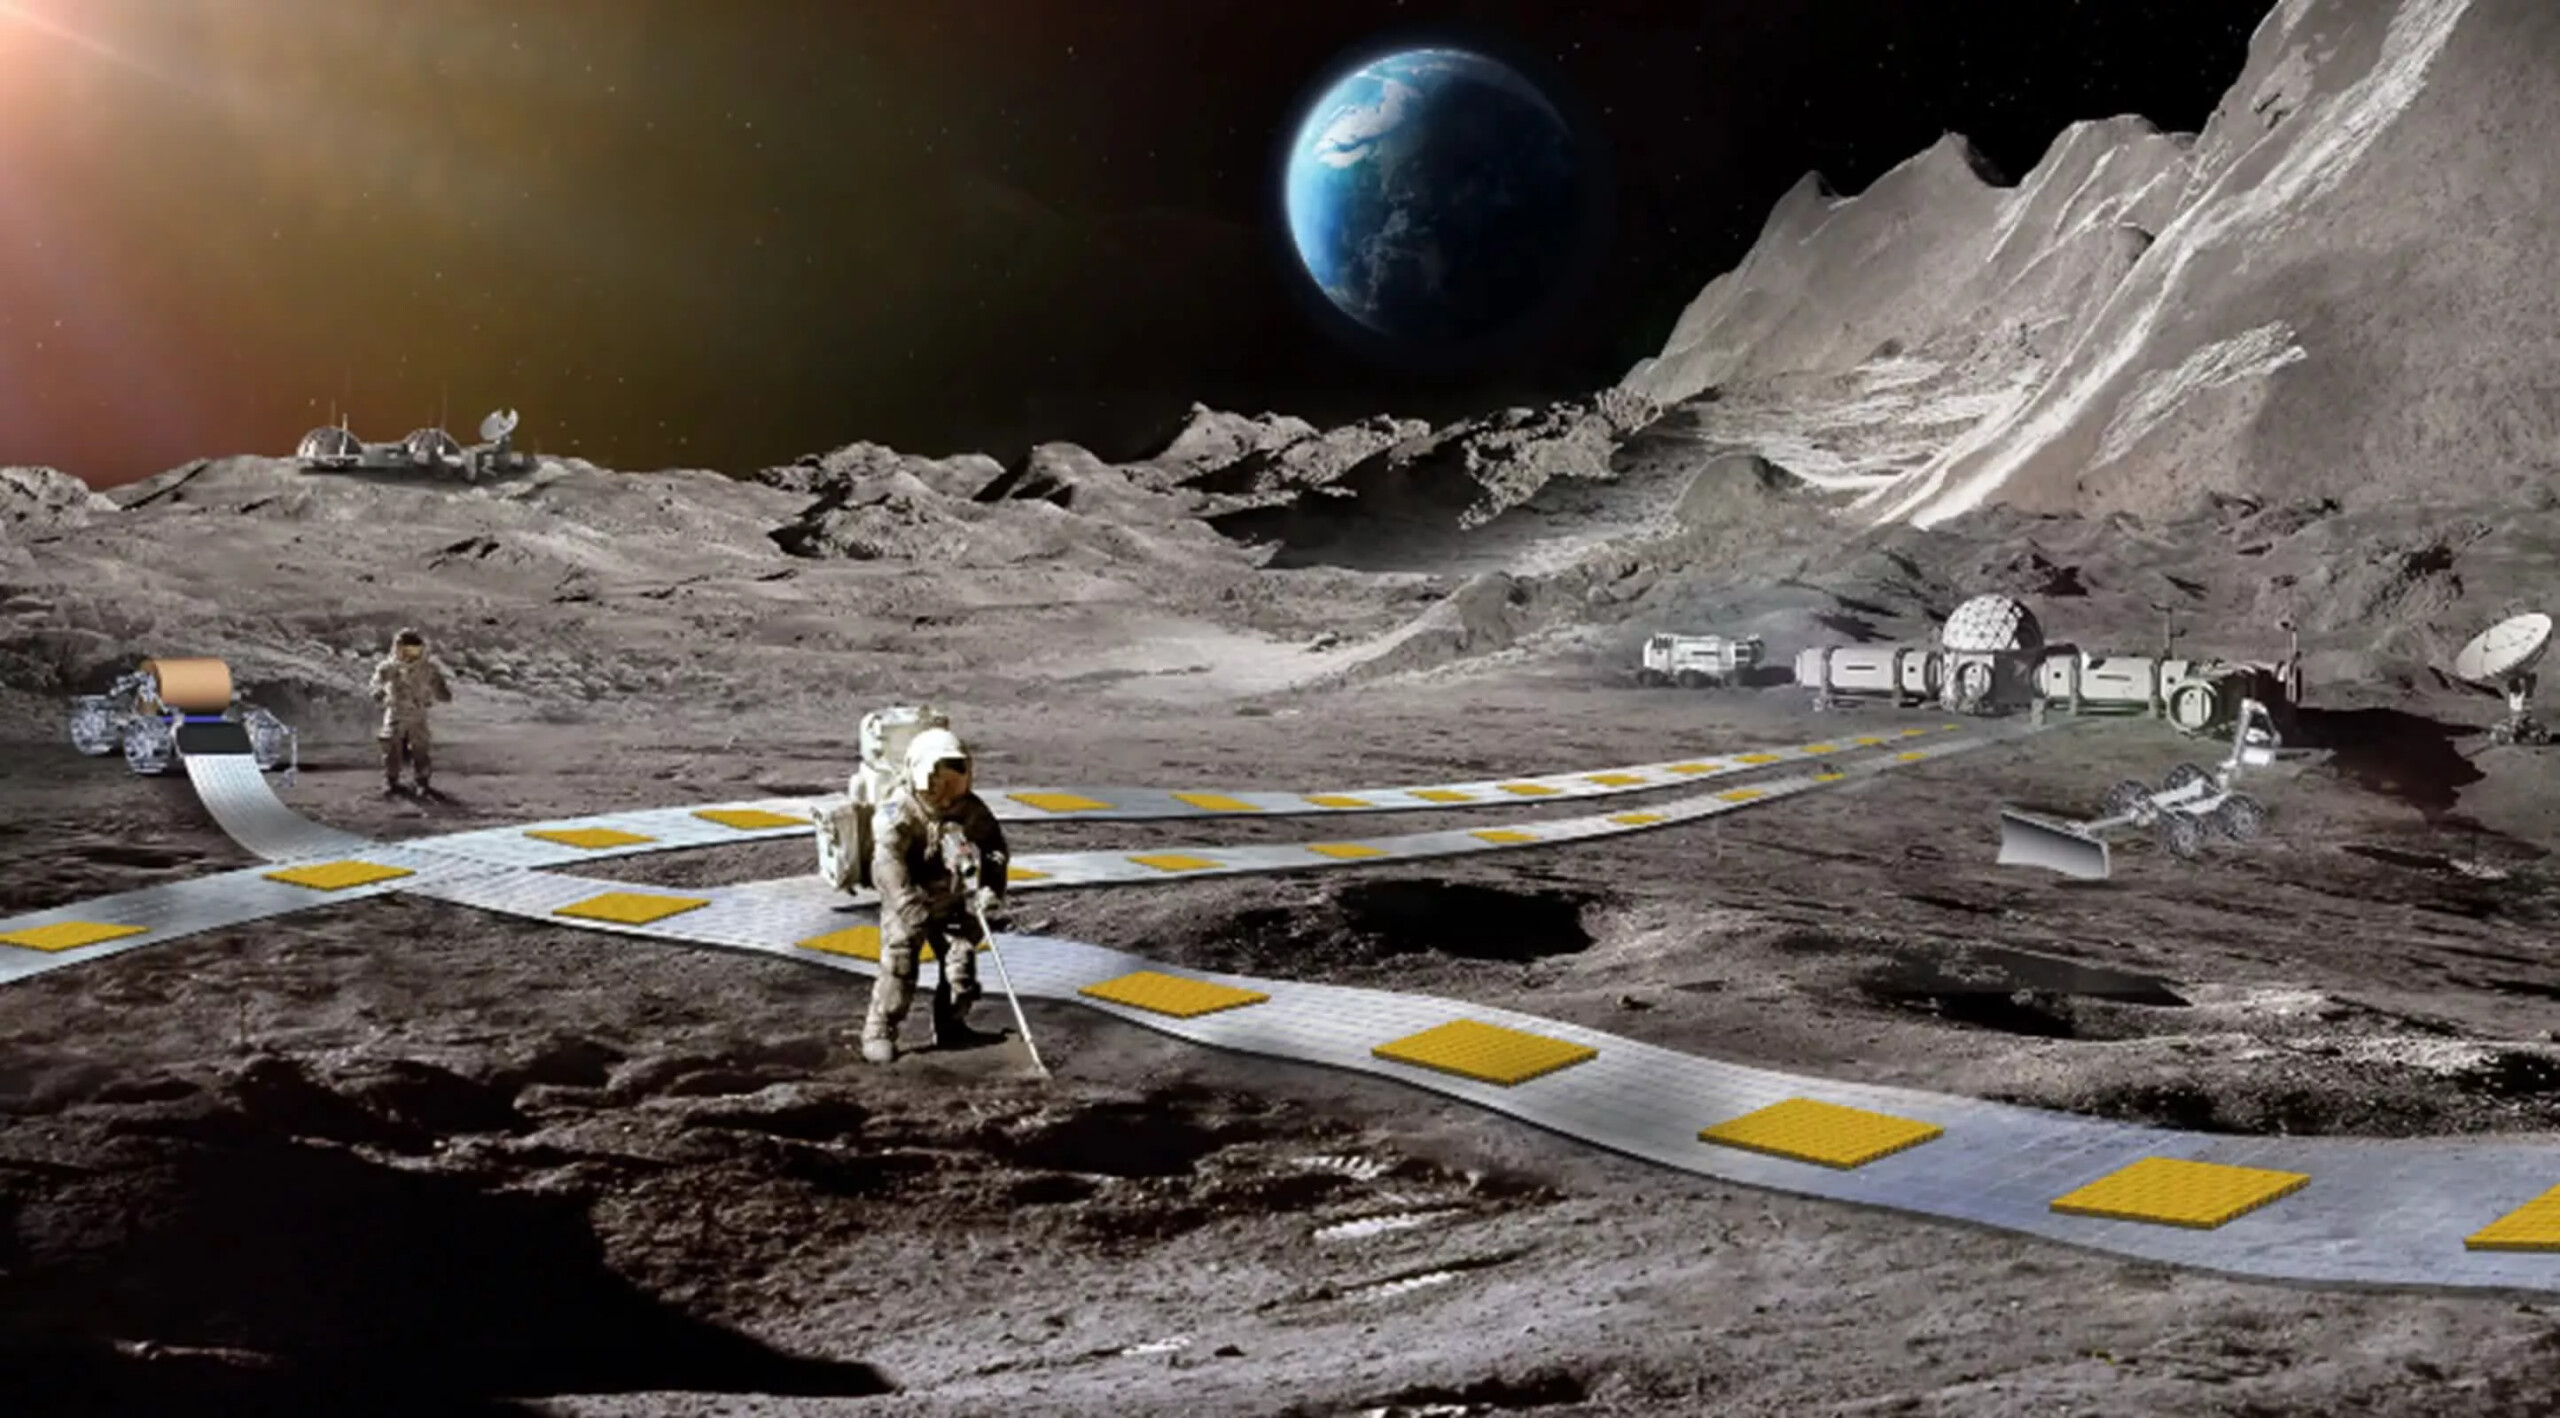 NASA is placing bets on a lunar rail system and cargo transit to Mars